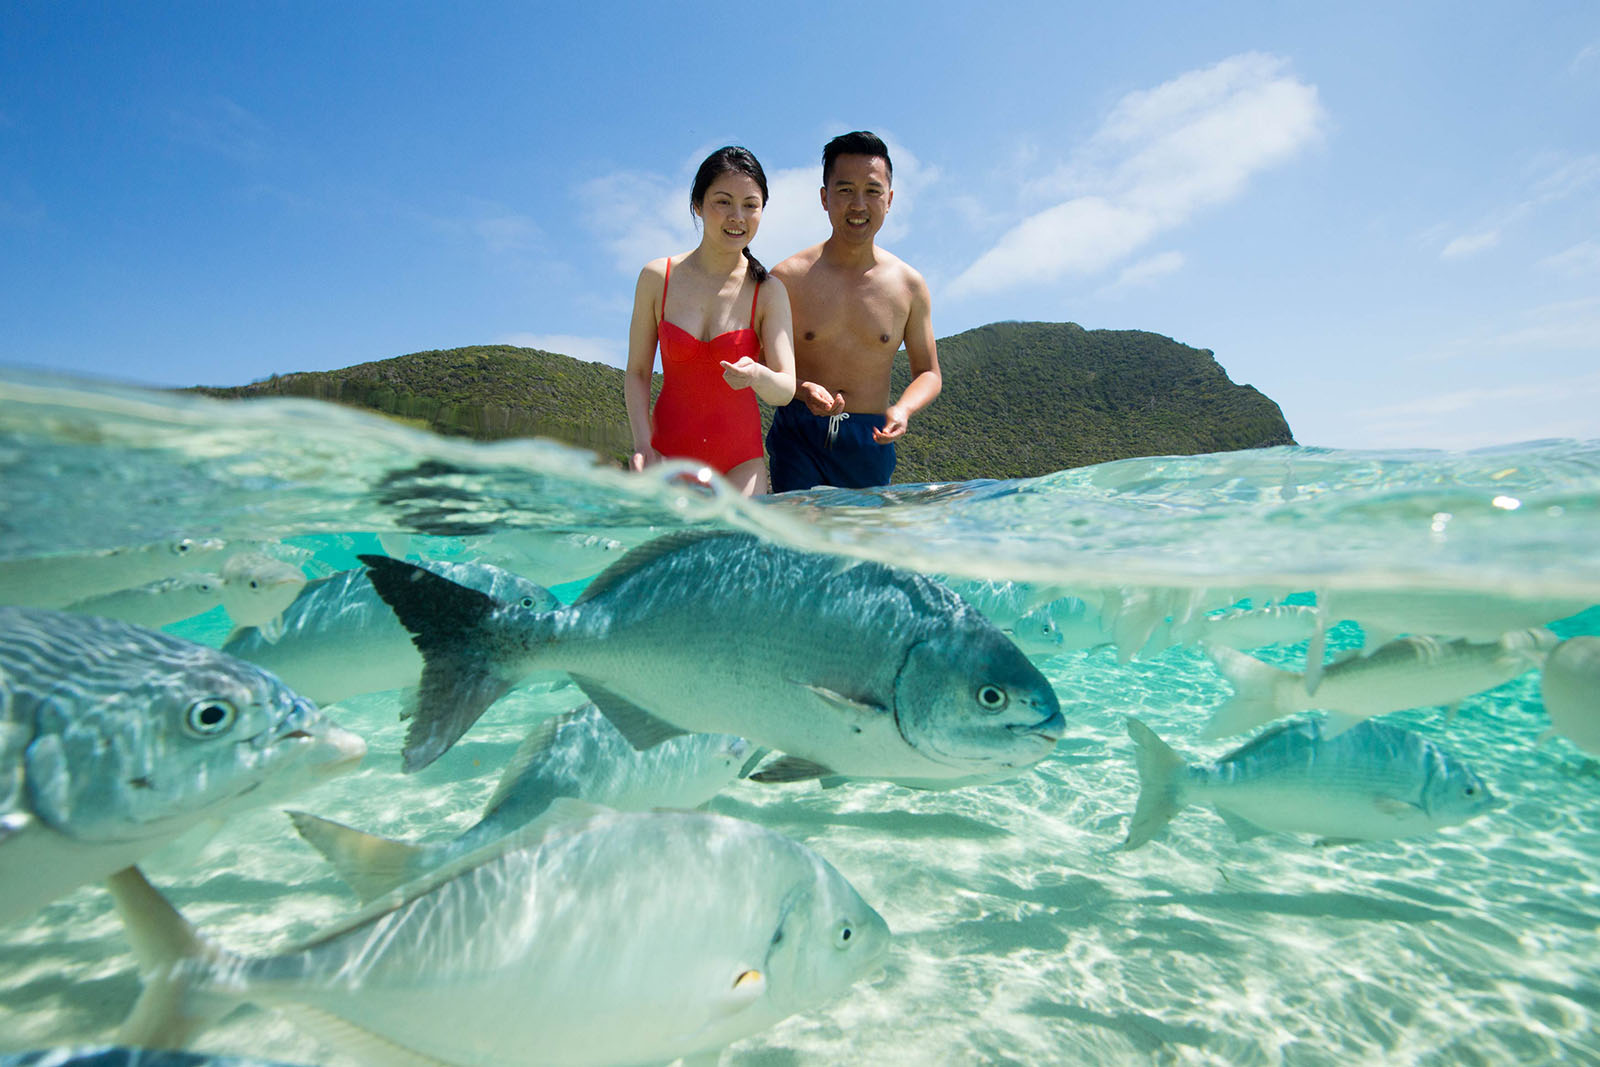 Fish feeding at Ned's Beach | Lord Howe Island, a natural paradise